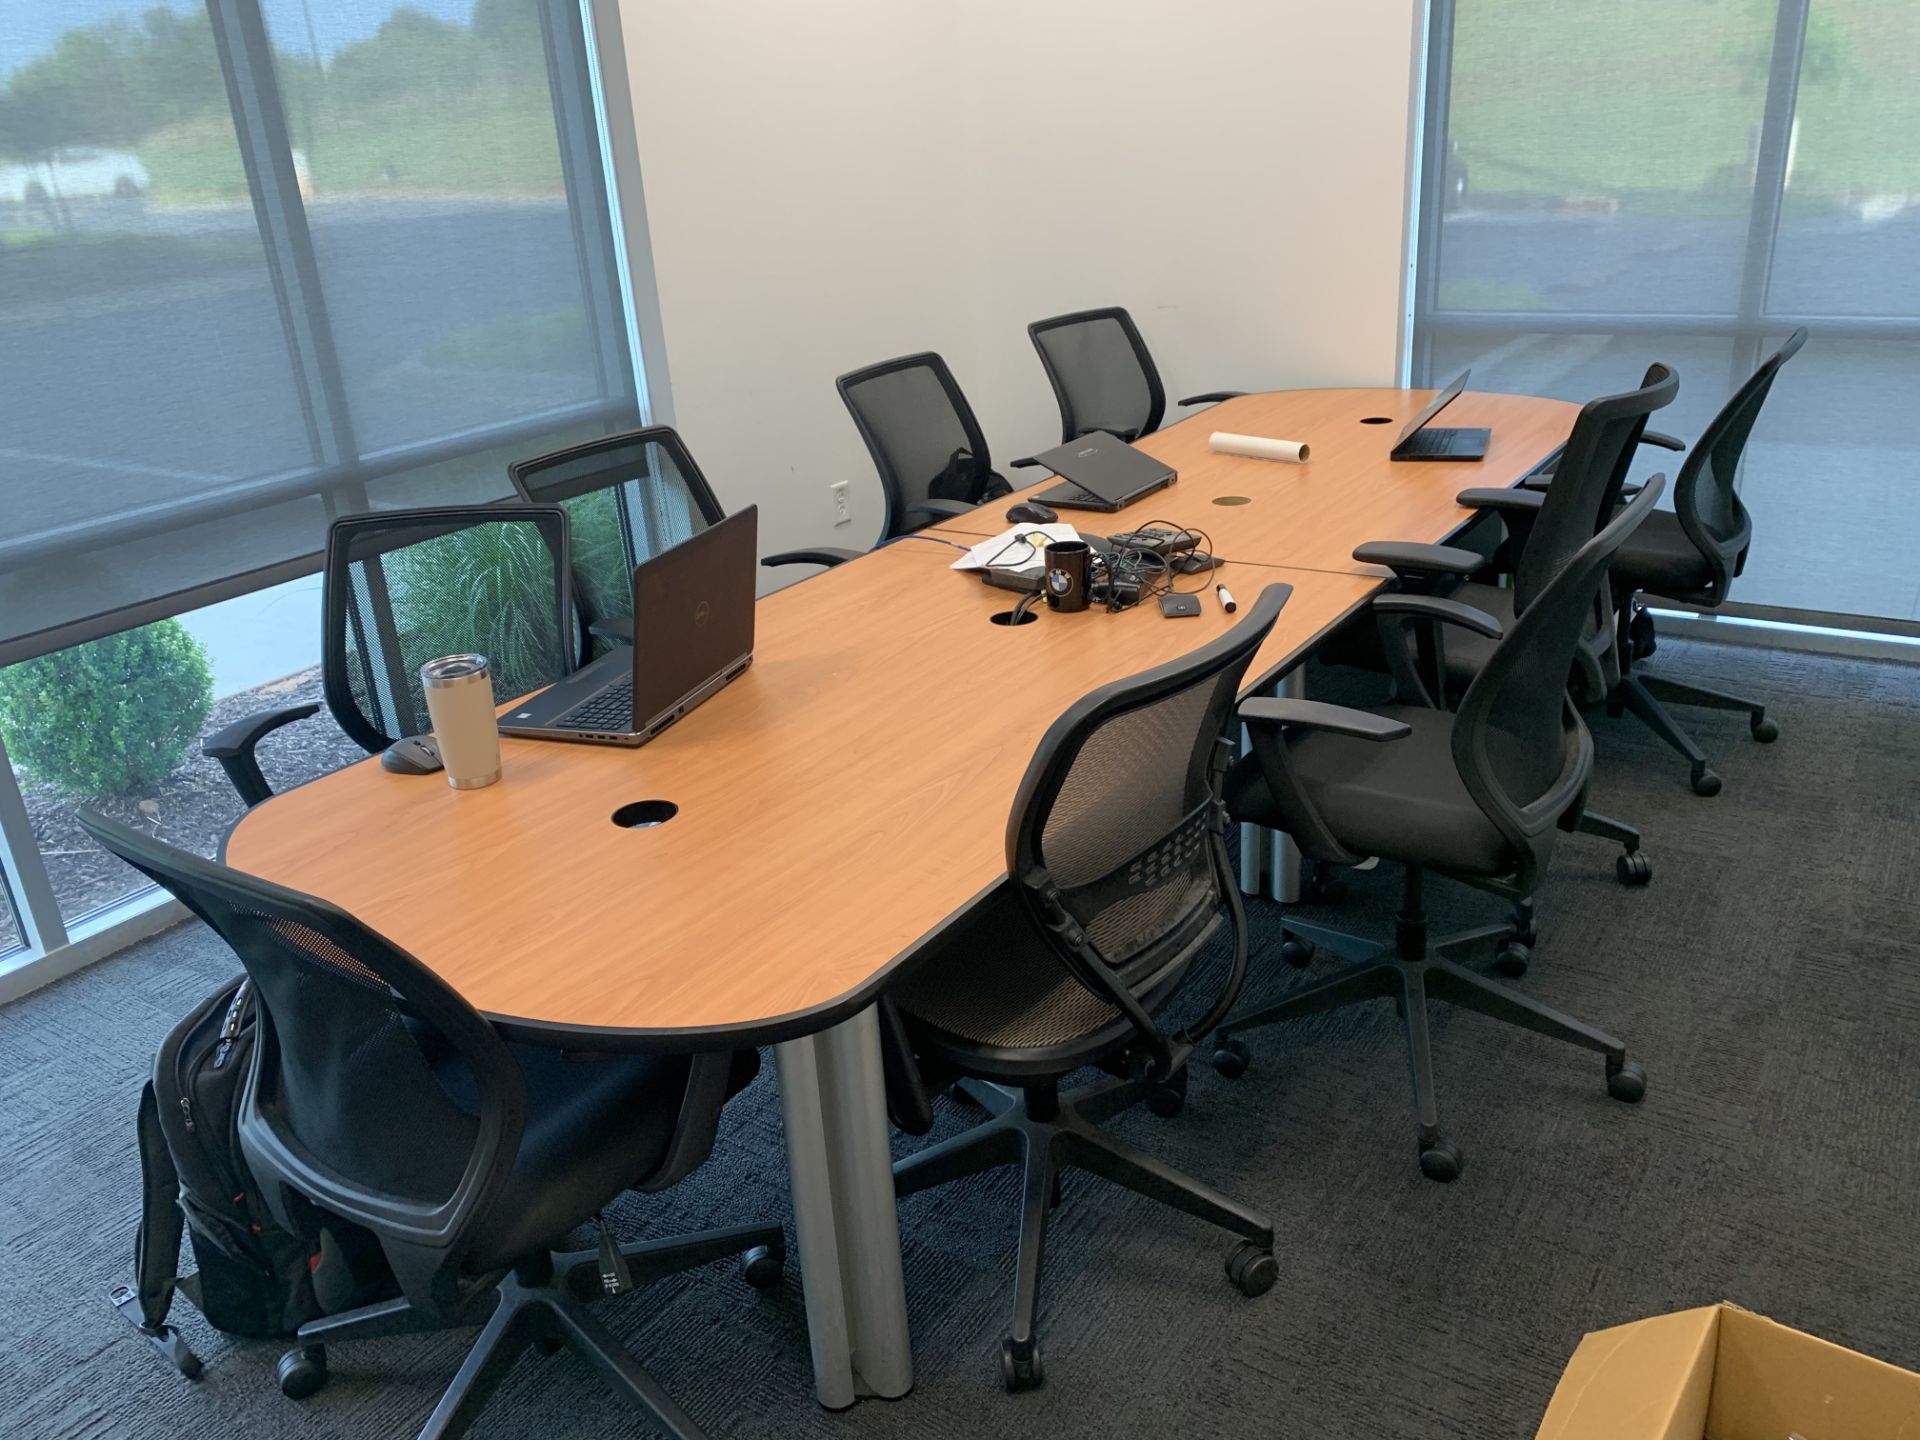 CONFERENCE TABLE WITH (8) CHAIRS (LAPTOP COMPUTERS NOT INCLUDED)